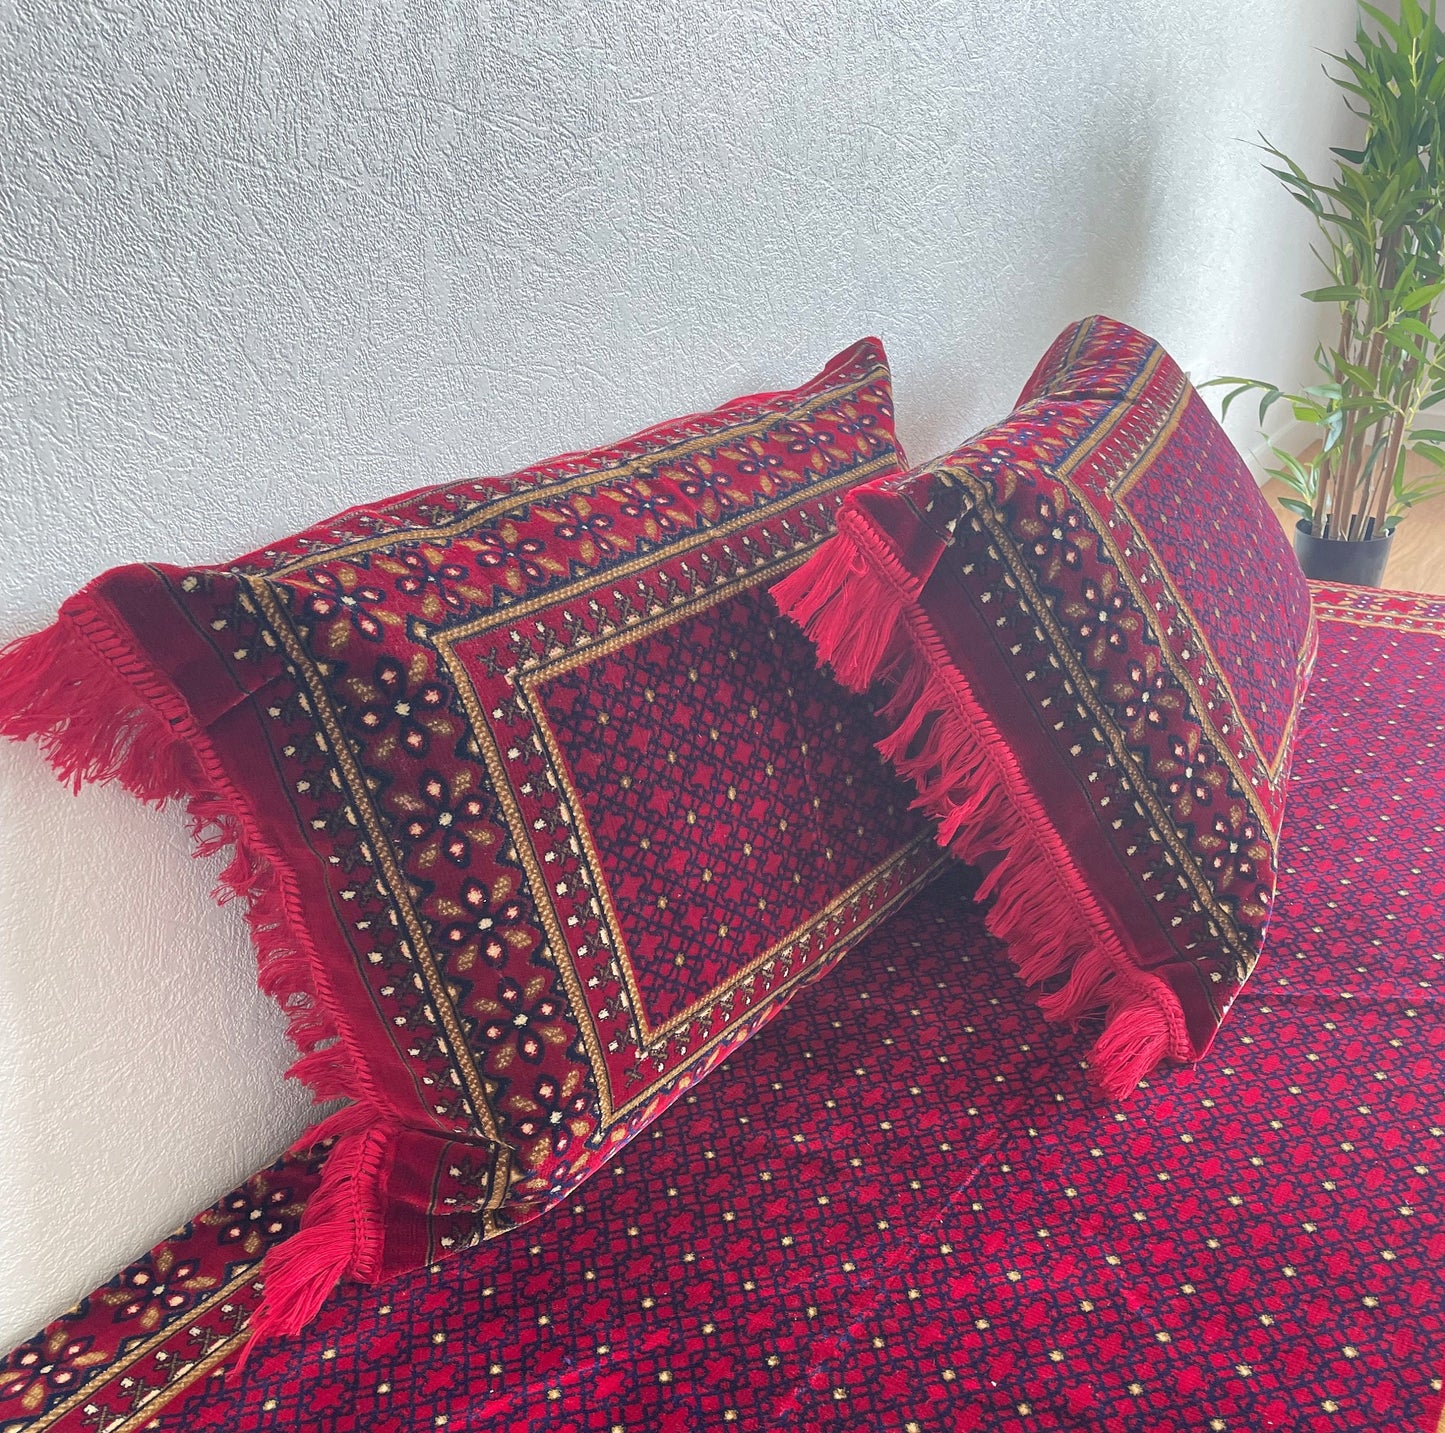 Afghan toshak 1 floor sofa + 2 pillows covers gift for mum, Arabic Moroccan Diwan Majlis Jalsa, gift for new afghan couple (cover only)